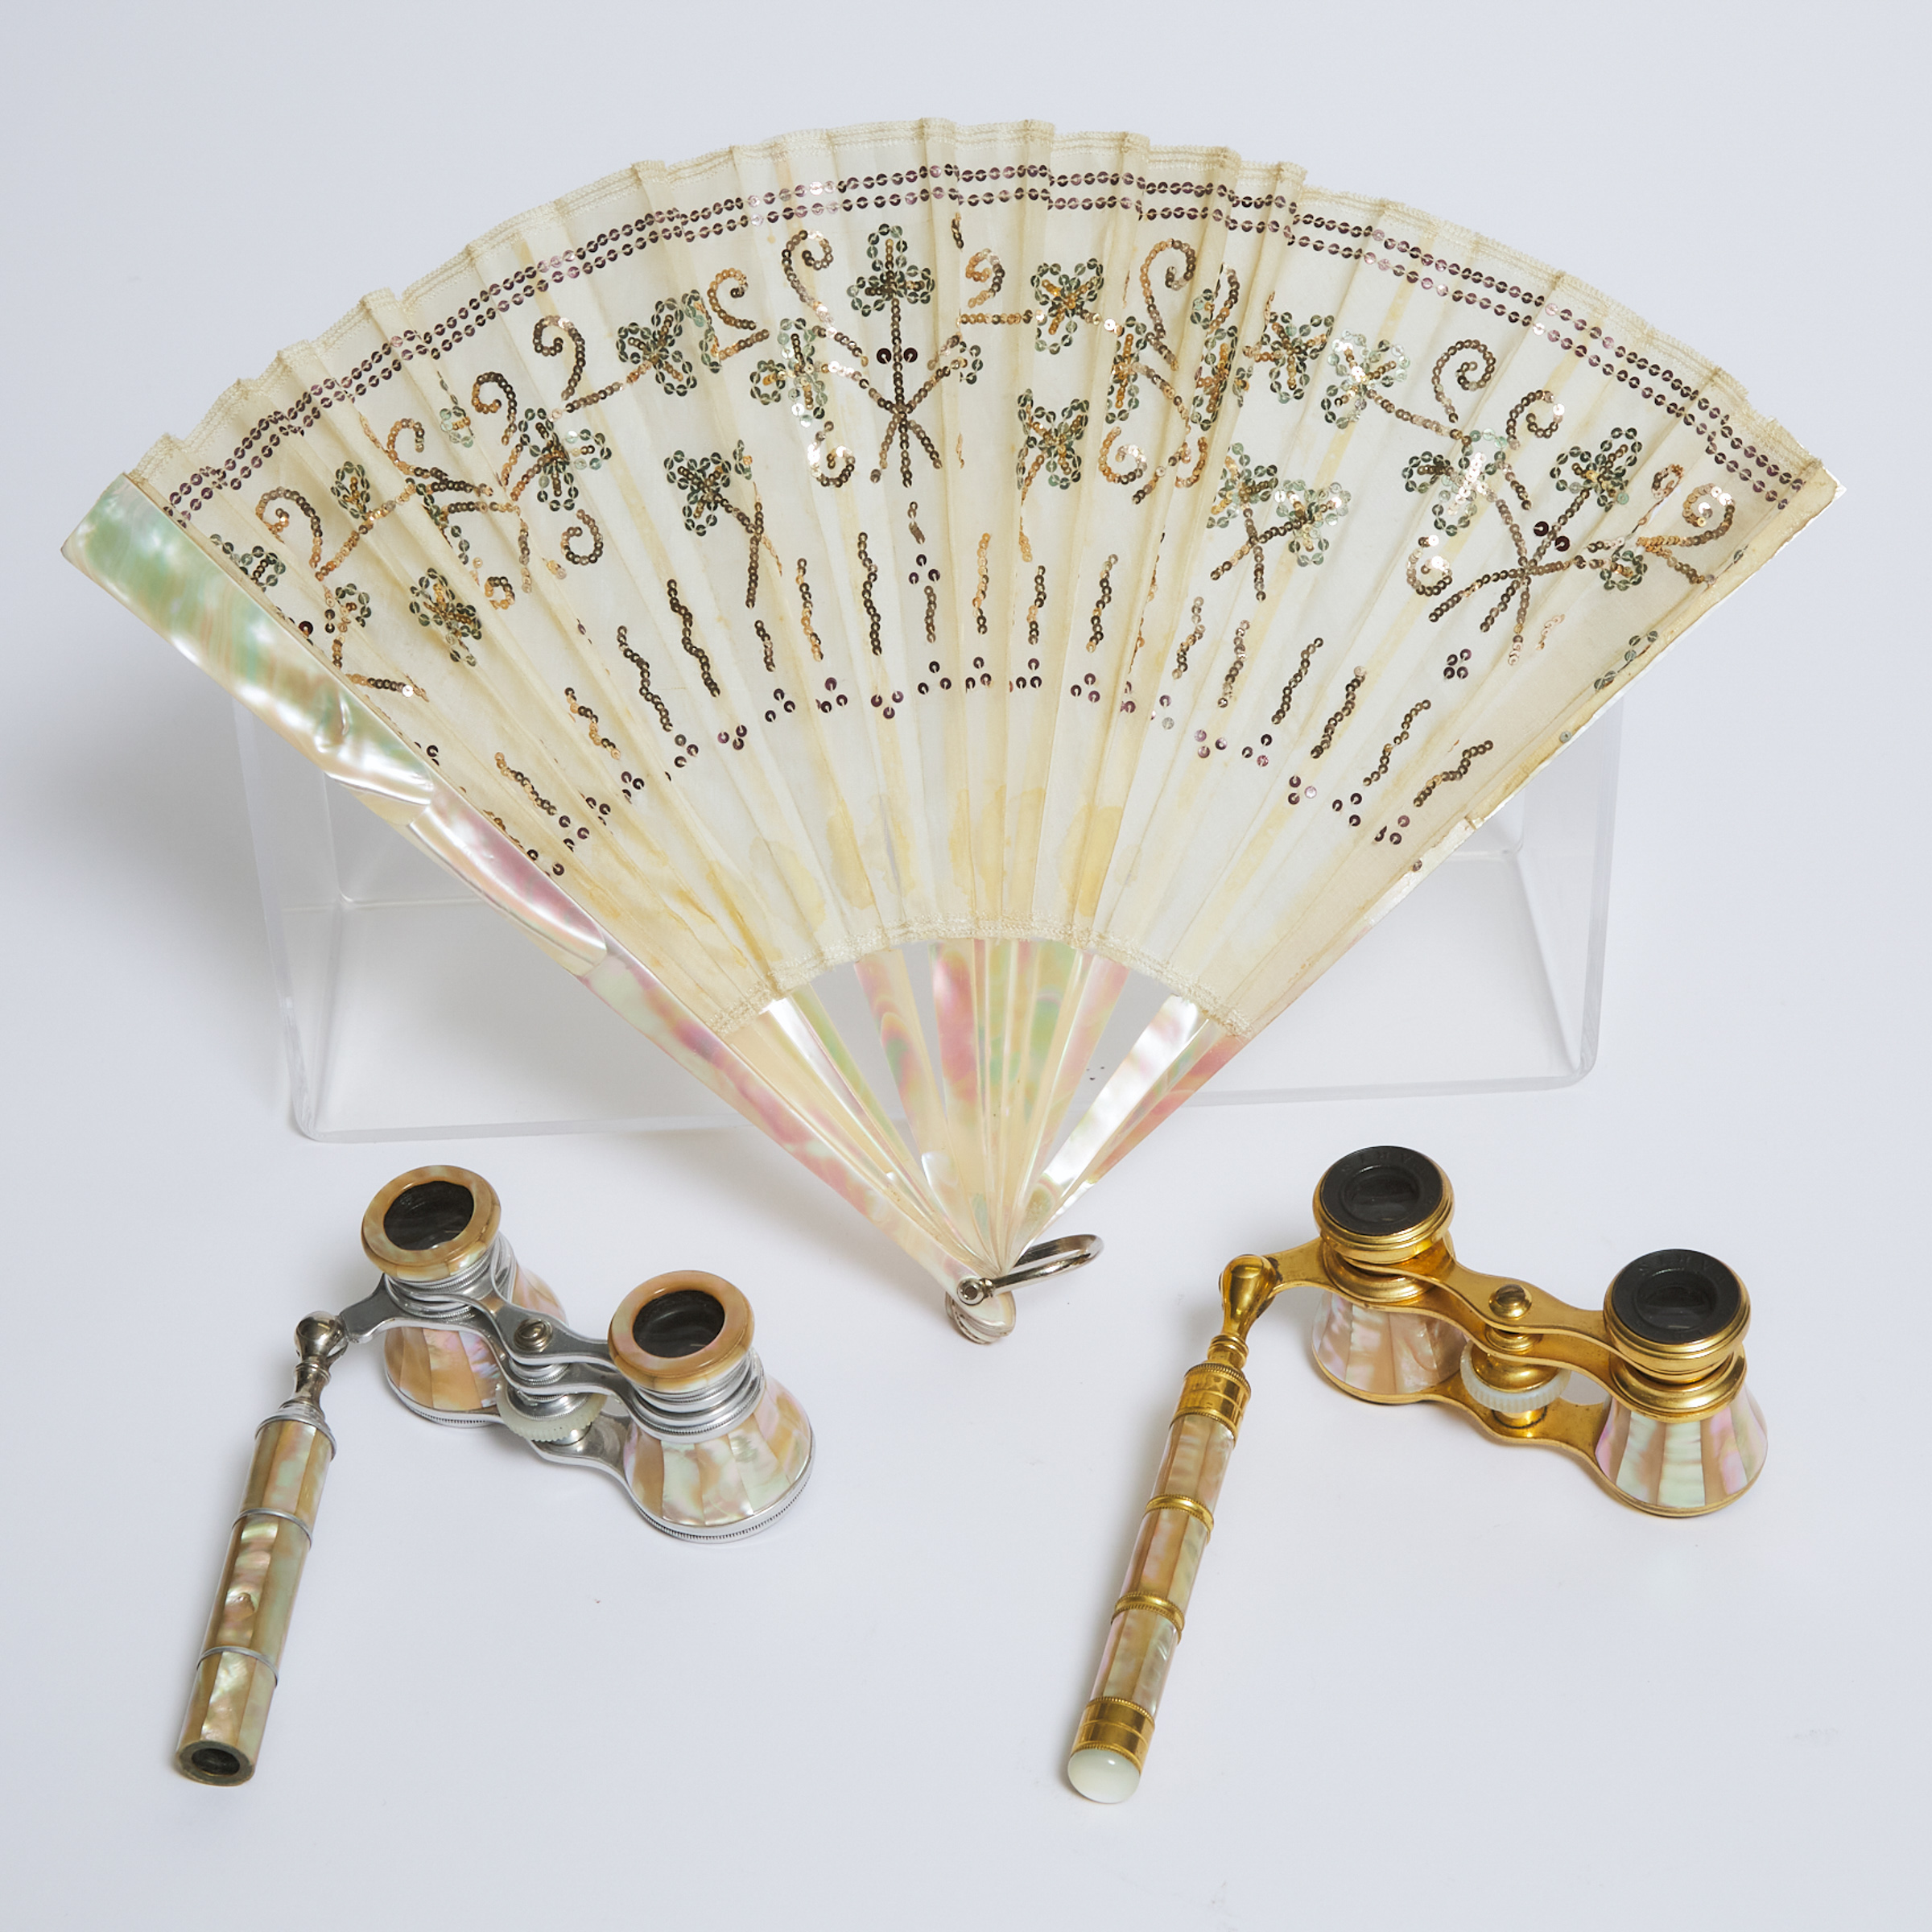 Two Pairs of French Opera Glasses and a Sequined Silk Hand Fan, late 19th/early 20th century